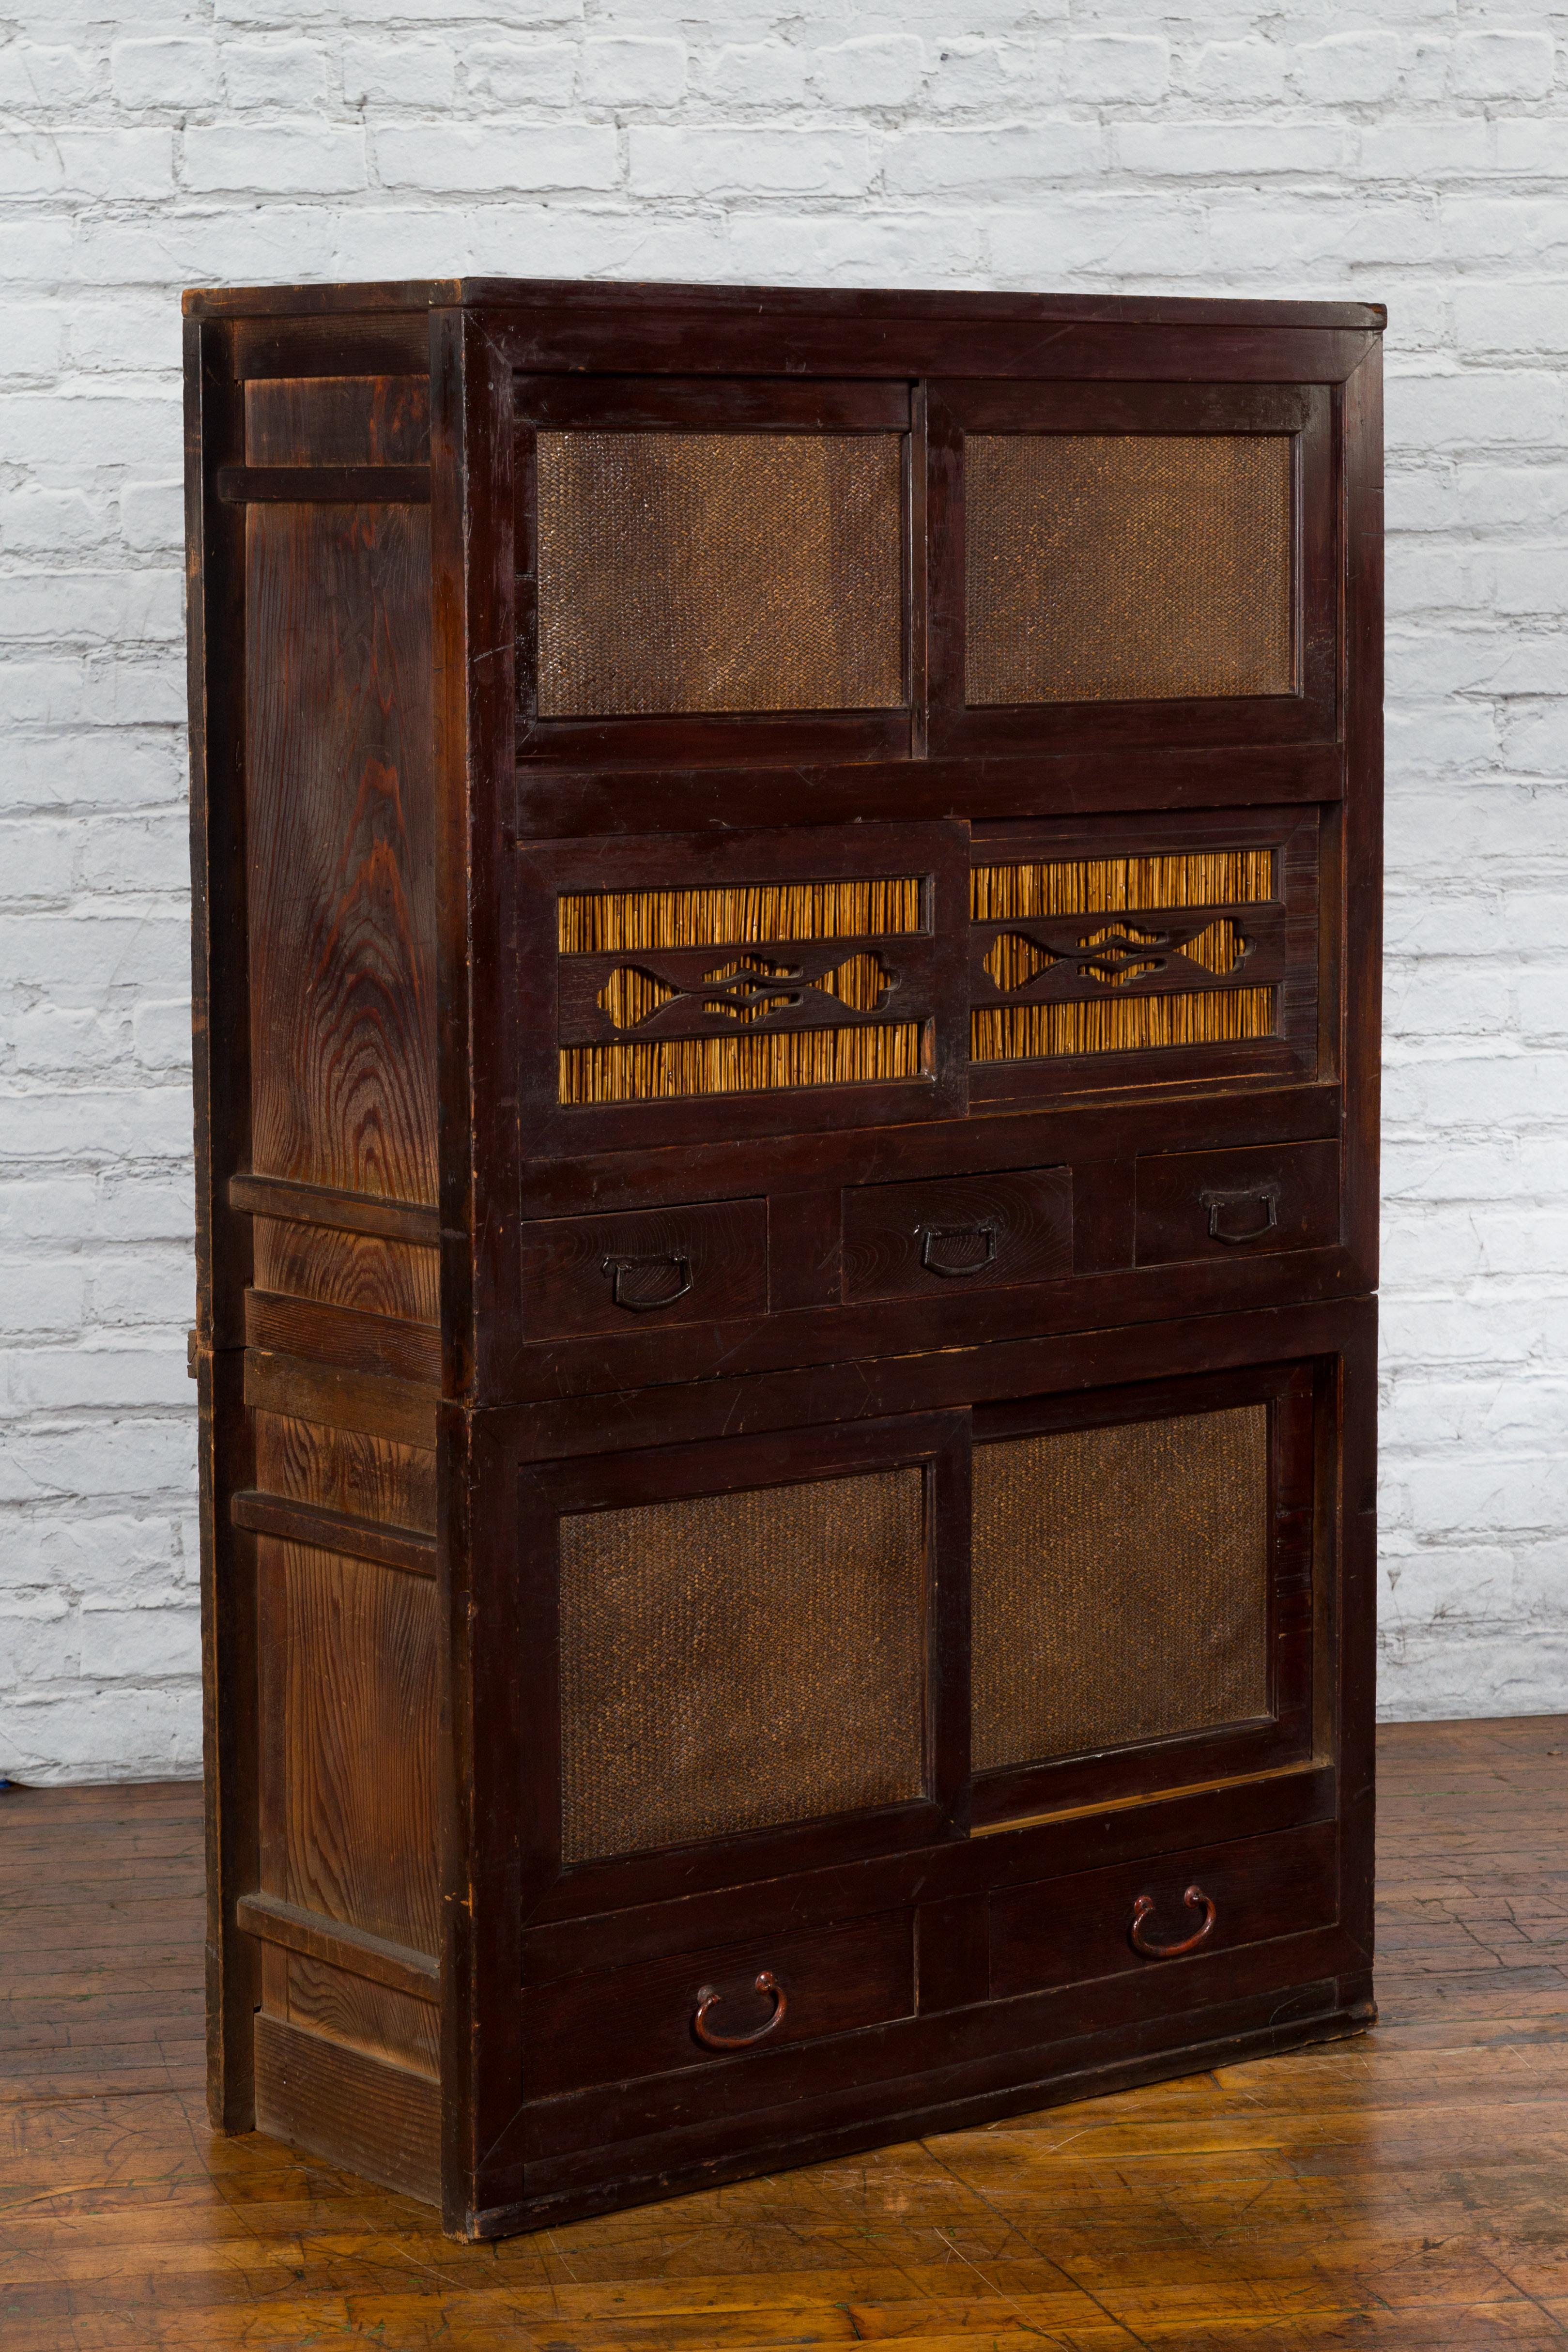 An antique Japanese tansu cabinet from the early 20th century, with sliding doors, drawers, reed and rattan design. Created in Japan during the early years of the 20th century, this tansu cabinet features a dark lacquer perfectly contrasted by